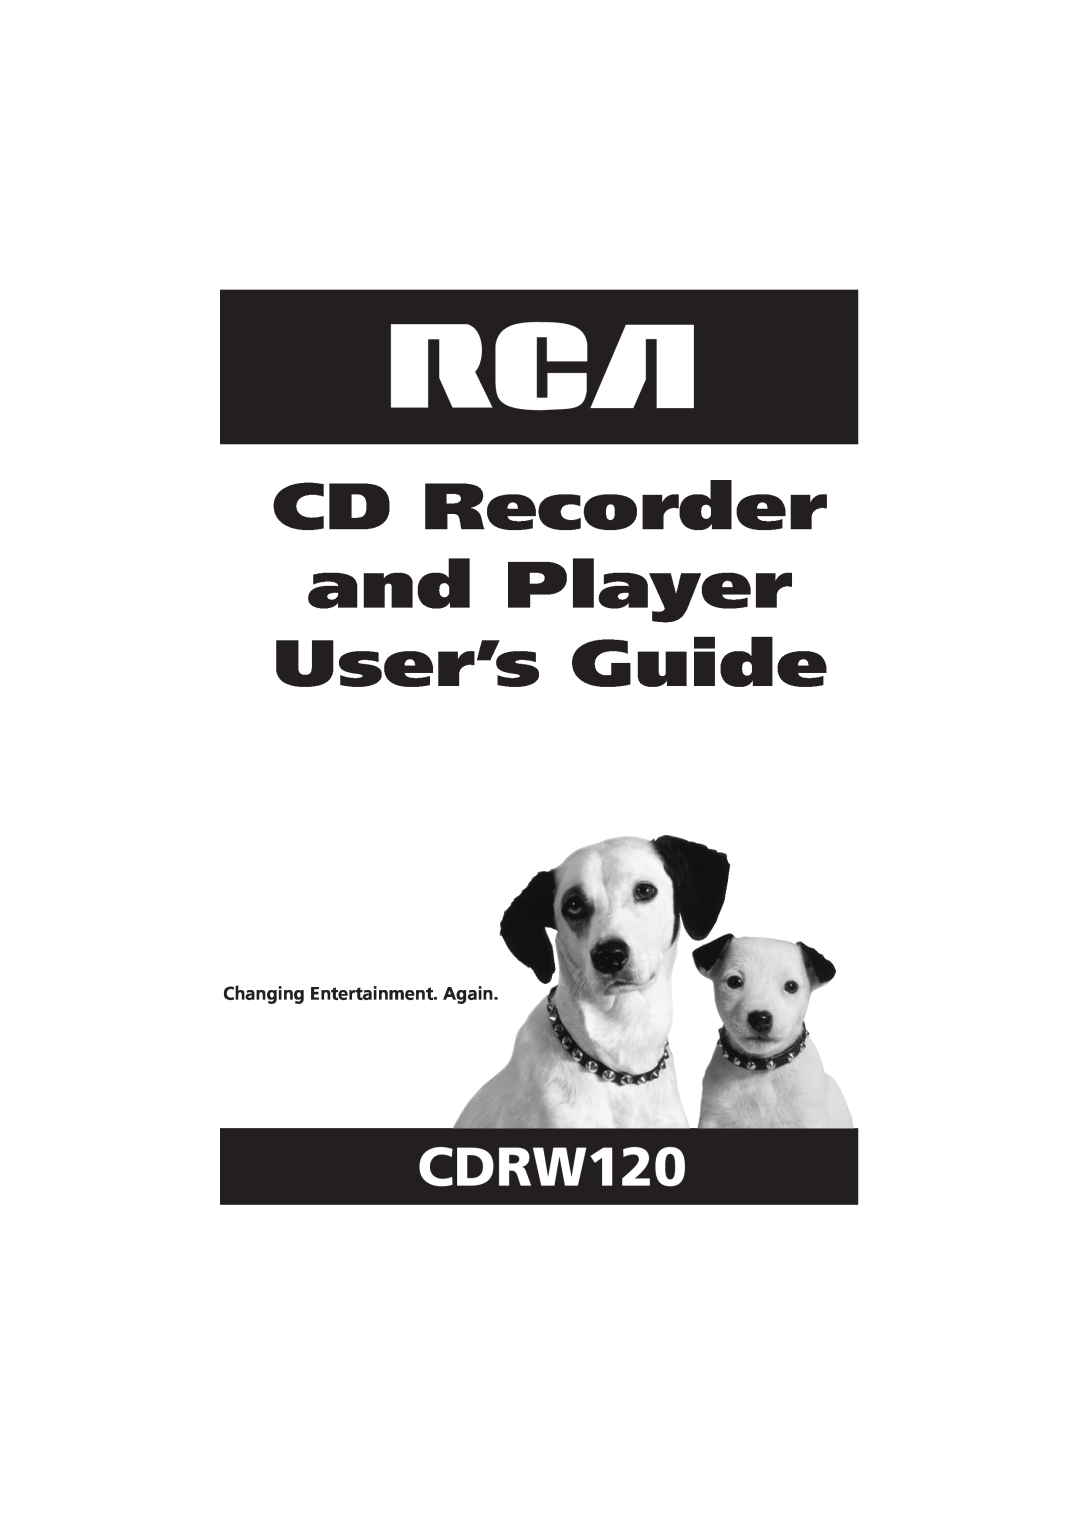 RCA CDRW10 manual CD Recorder and Player User’s Guide, CDRW120, Changing Entertainment. Again 